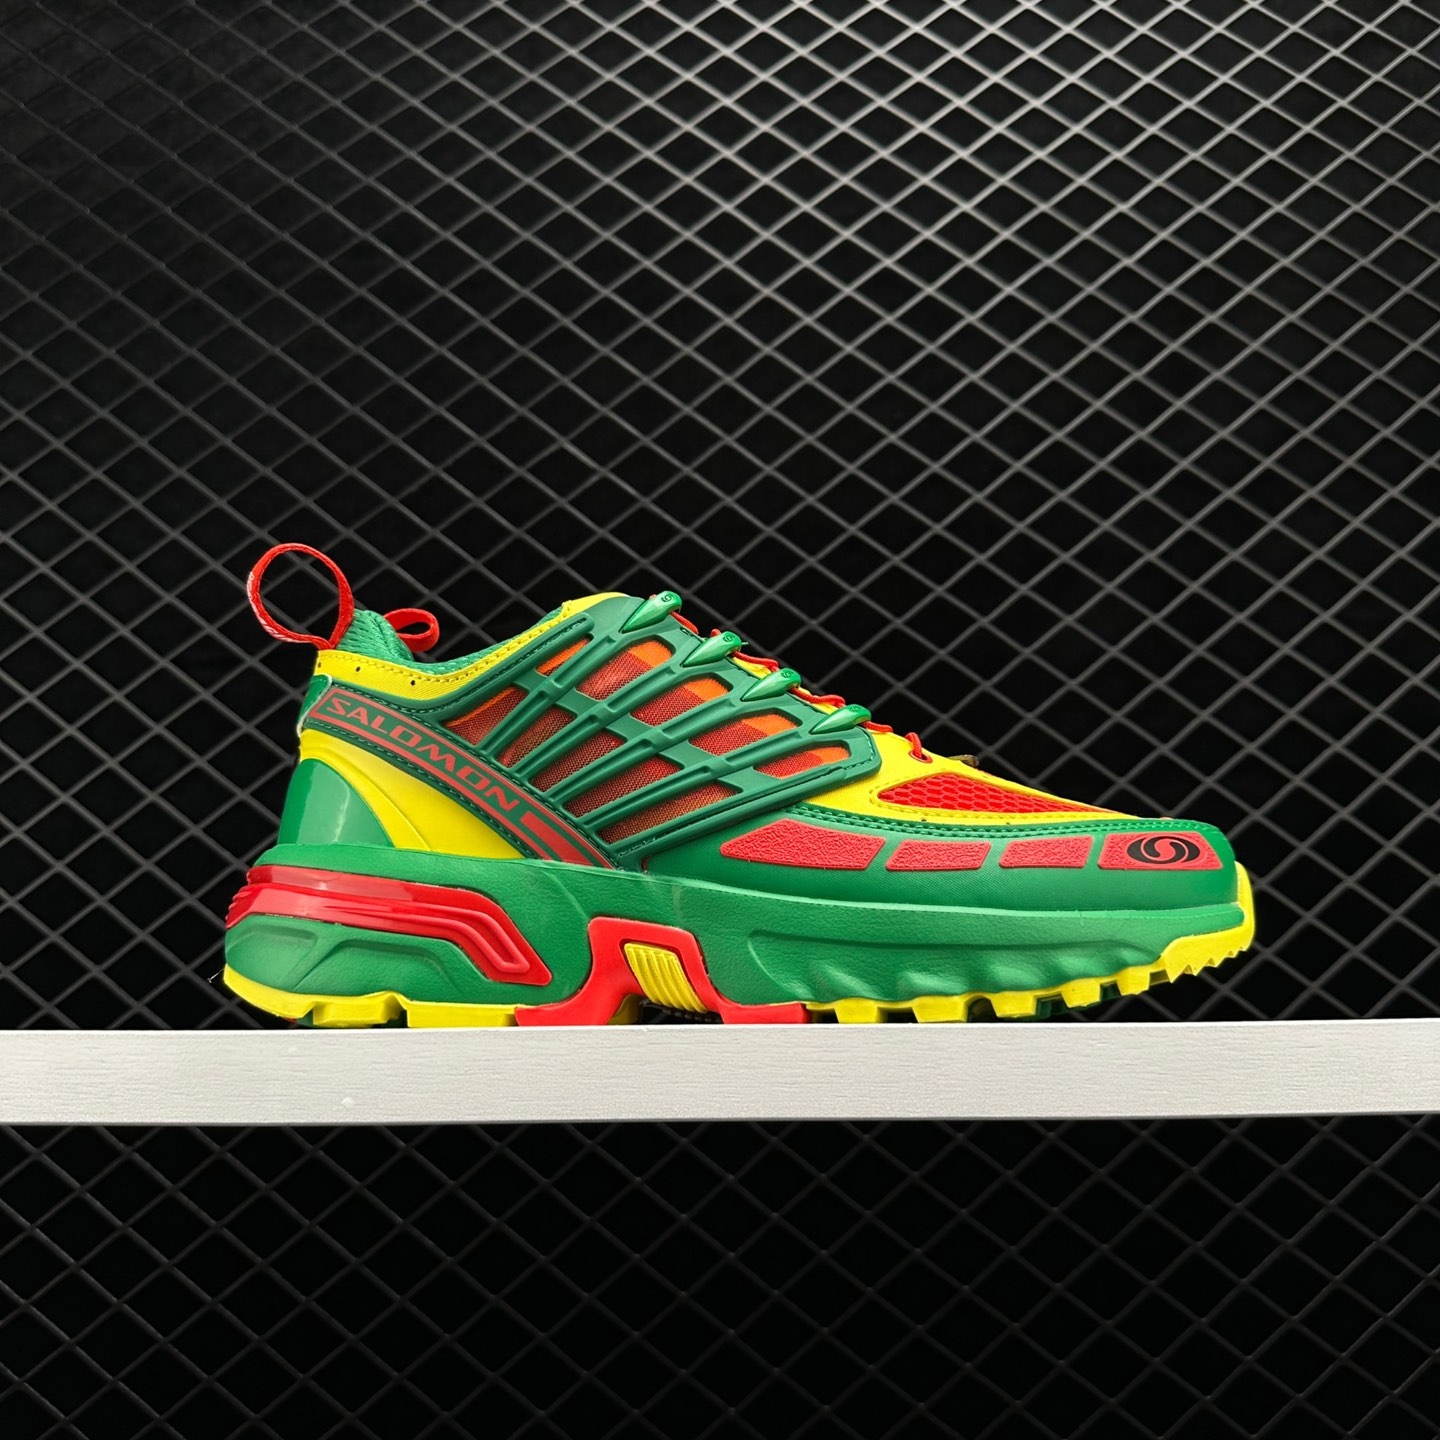 Salomon ACS PRO Advanced Kar L'Art De L'Automobile Green Red Yellow L41717300 - High-performance auto-inspired sneakers for style and durability.